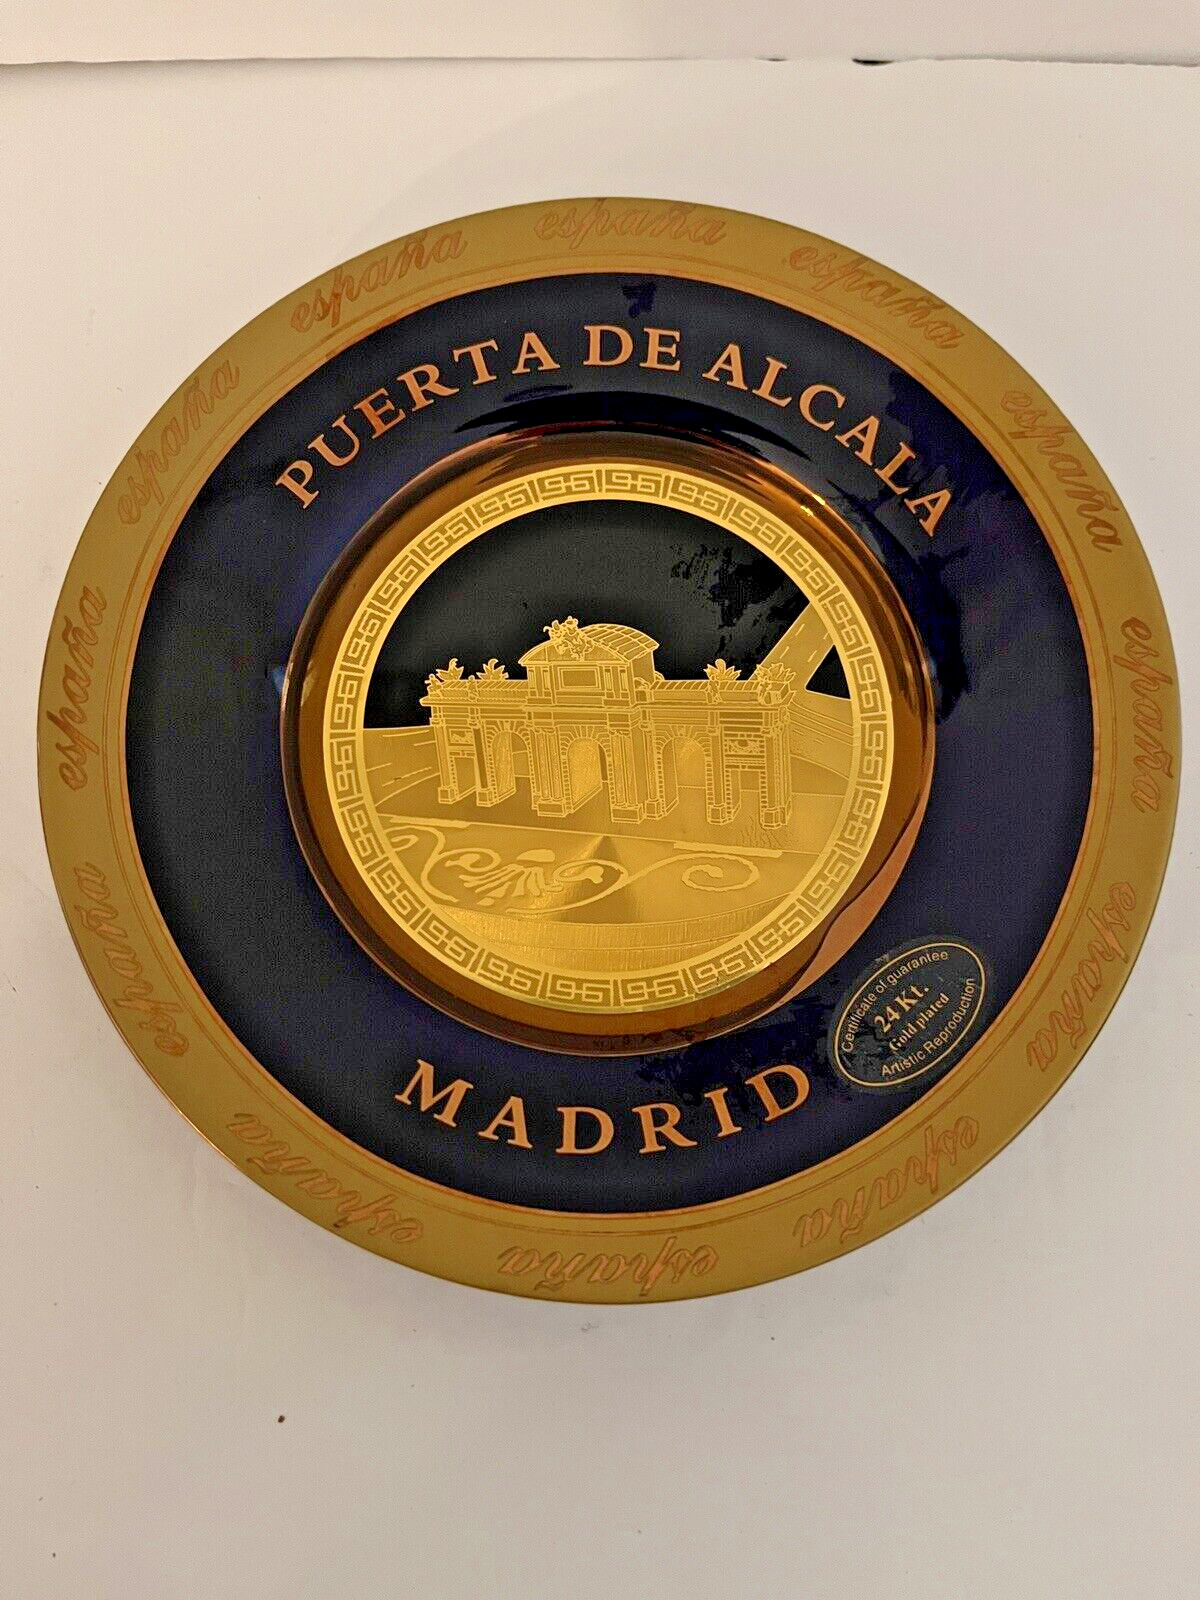 NEW Puerta De Alcala Madrid Plate 24K Gold Plated and Deep Blue Plate 6\